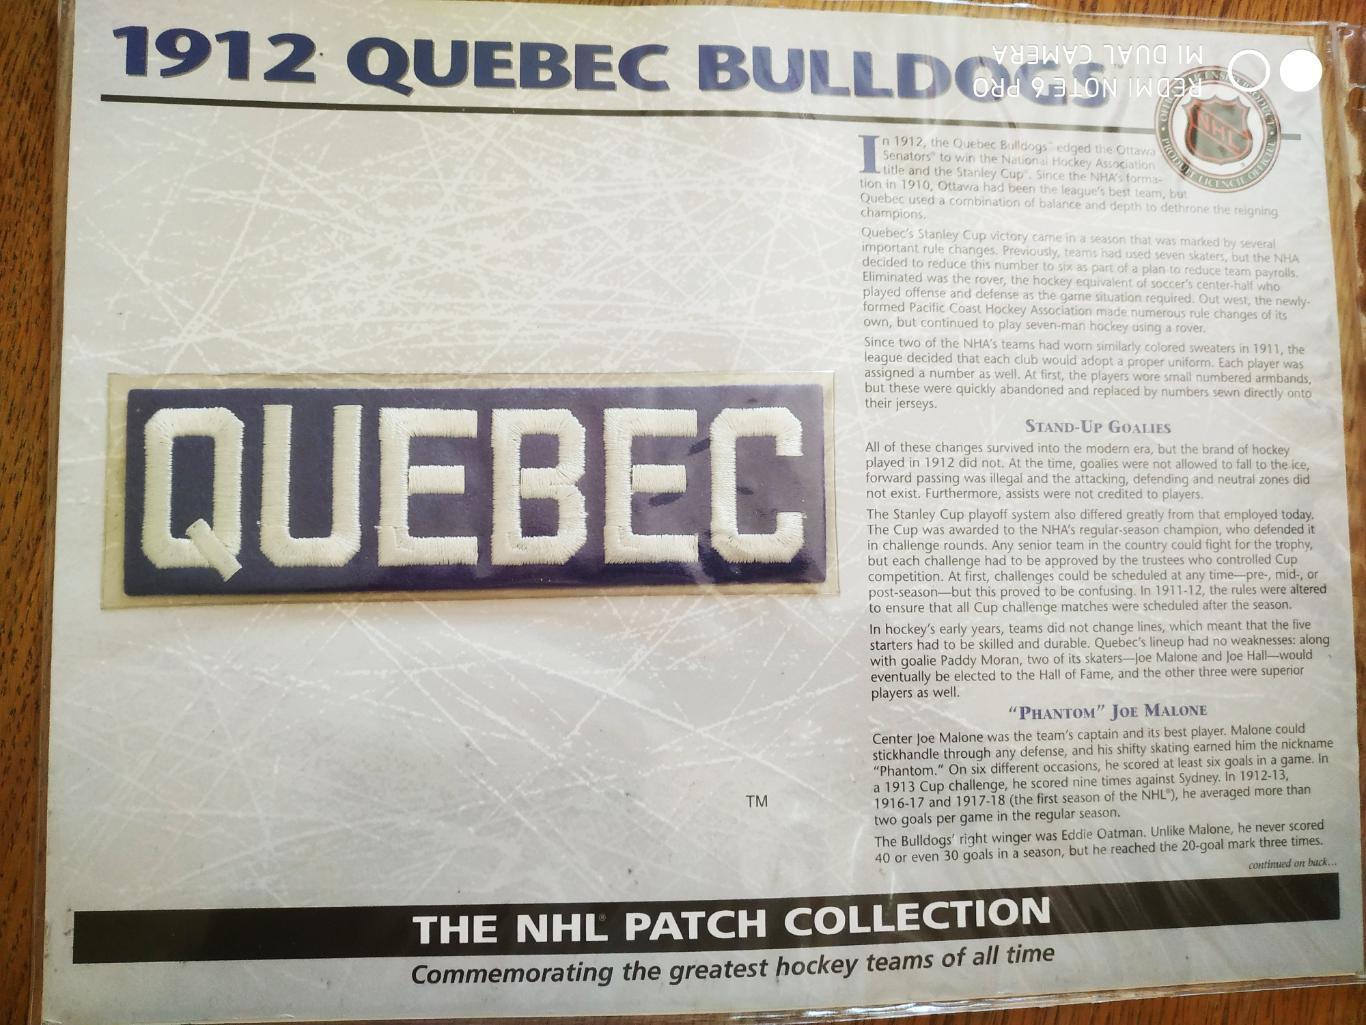 ХОККЕЙ НАШИВКА НХЛ 1912 QUEBEC BULLDOGS THE NHL PATCH COLLECTION WILLABEE WARD